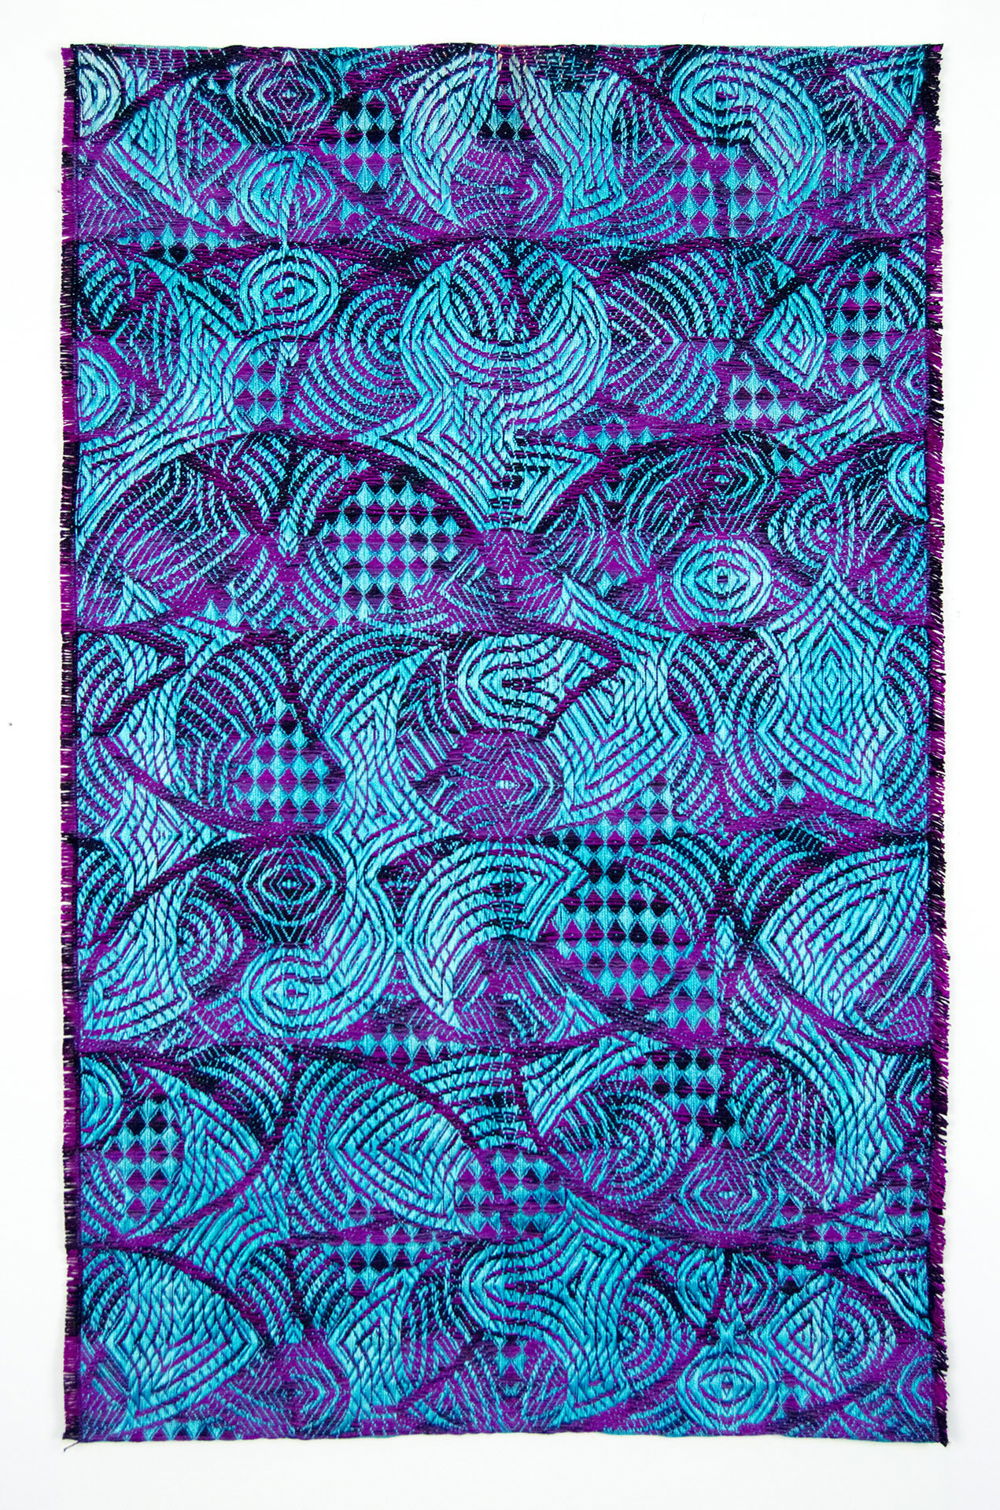 <em>#466B, Converging Paths: Turquoise</em>, 2018. Silk, linen, digital jacquard, hand woven TC2 loom, painted warp, shifted weft ikat, 45.5 x 28.5 inches. 	